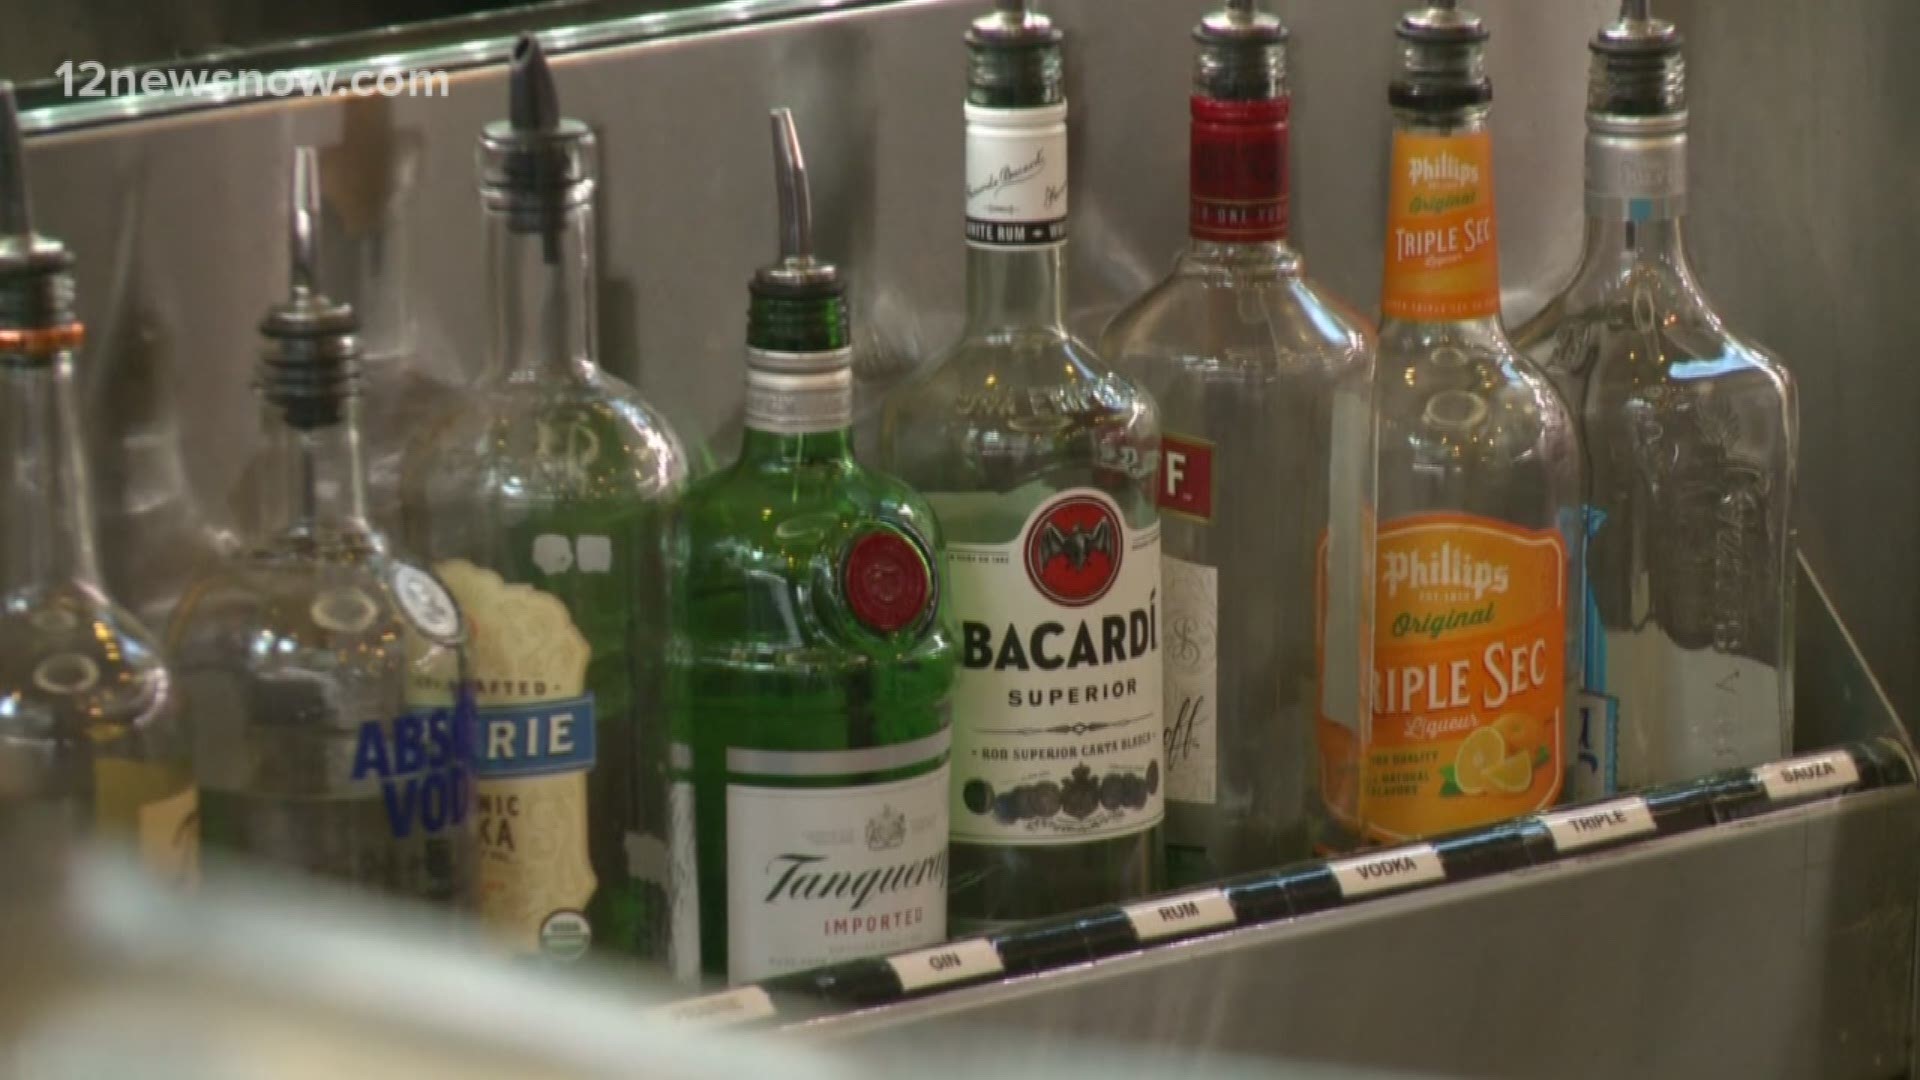 Some bar owners are frustrated by the policy changes